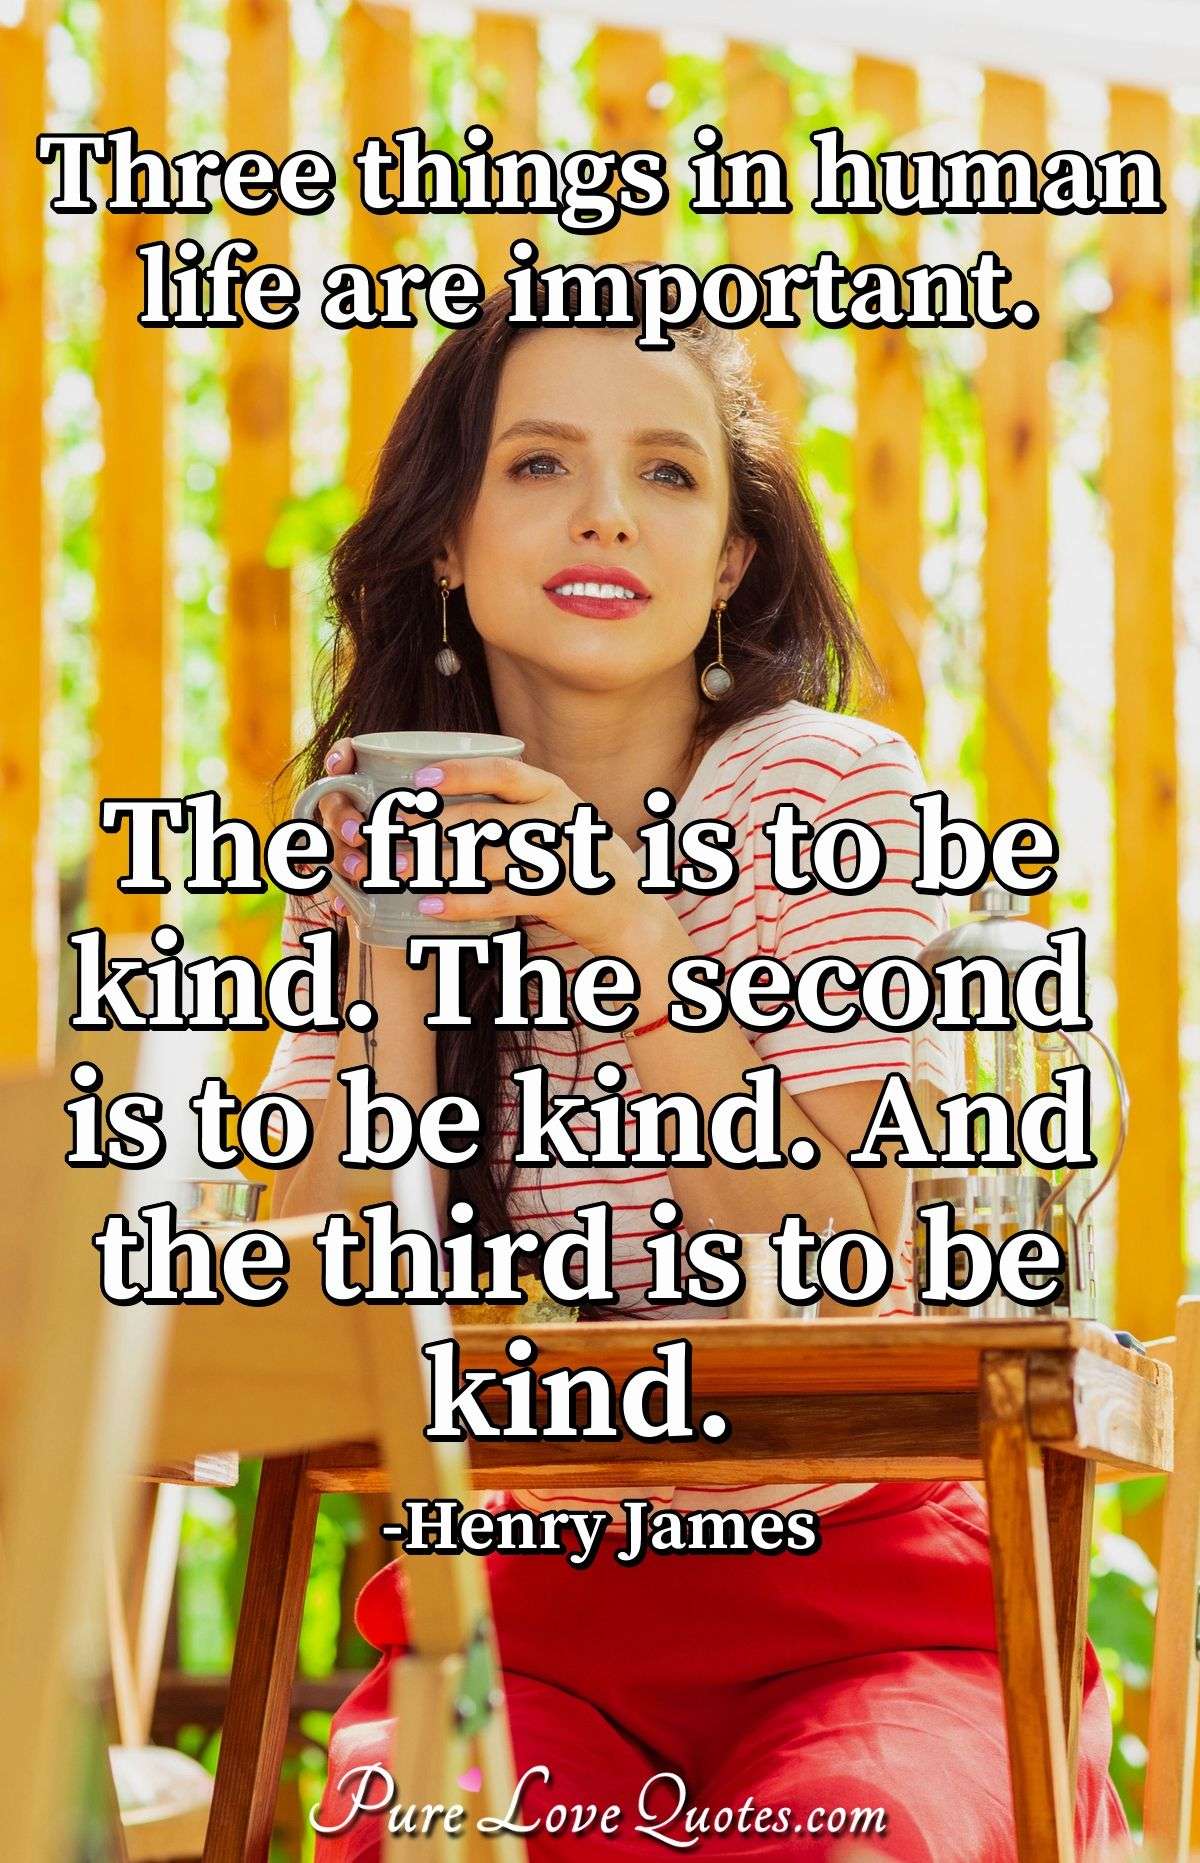 Three things in human life are important. The first is to be kind. The second is to be kind. And the third is to be kind. - Henry James